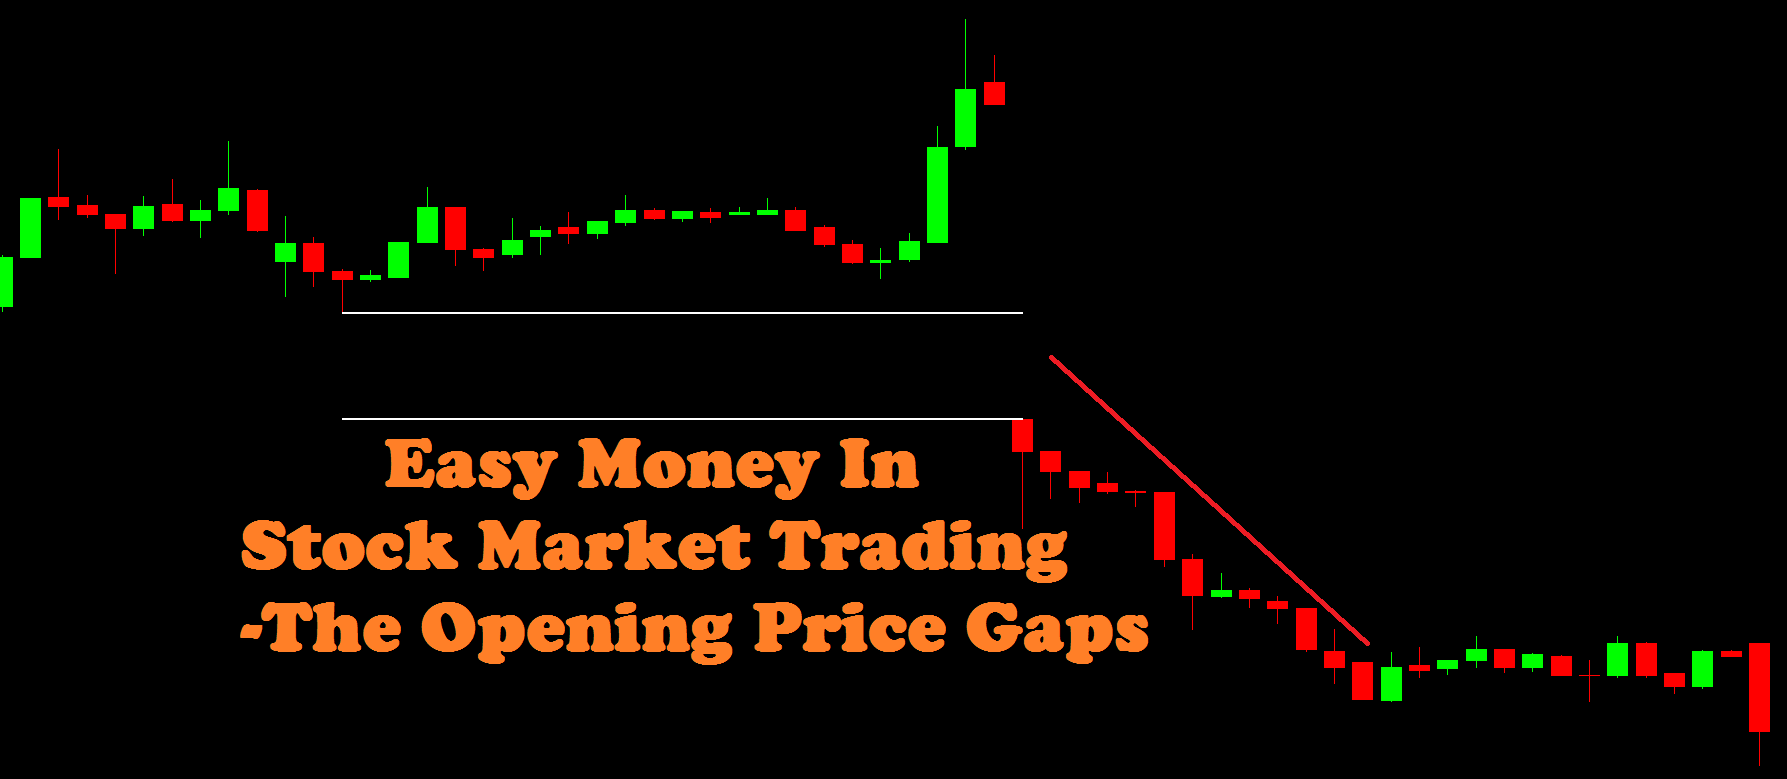 Easy Money In Stock Market Trading-The Opening Price Gaps